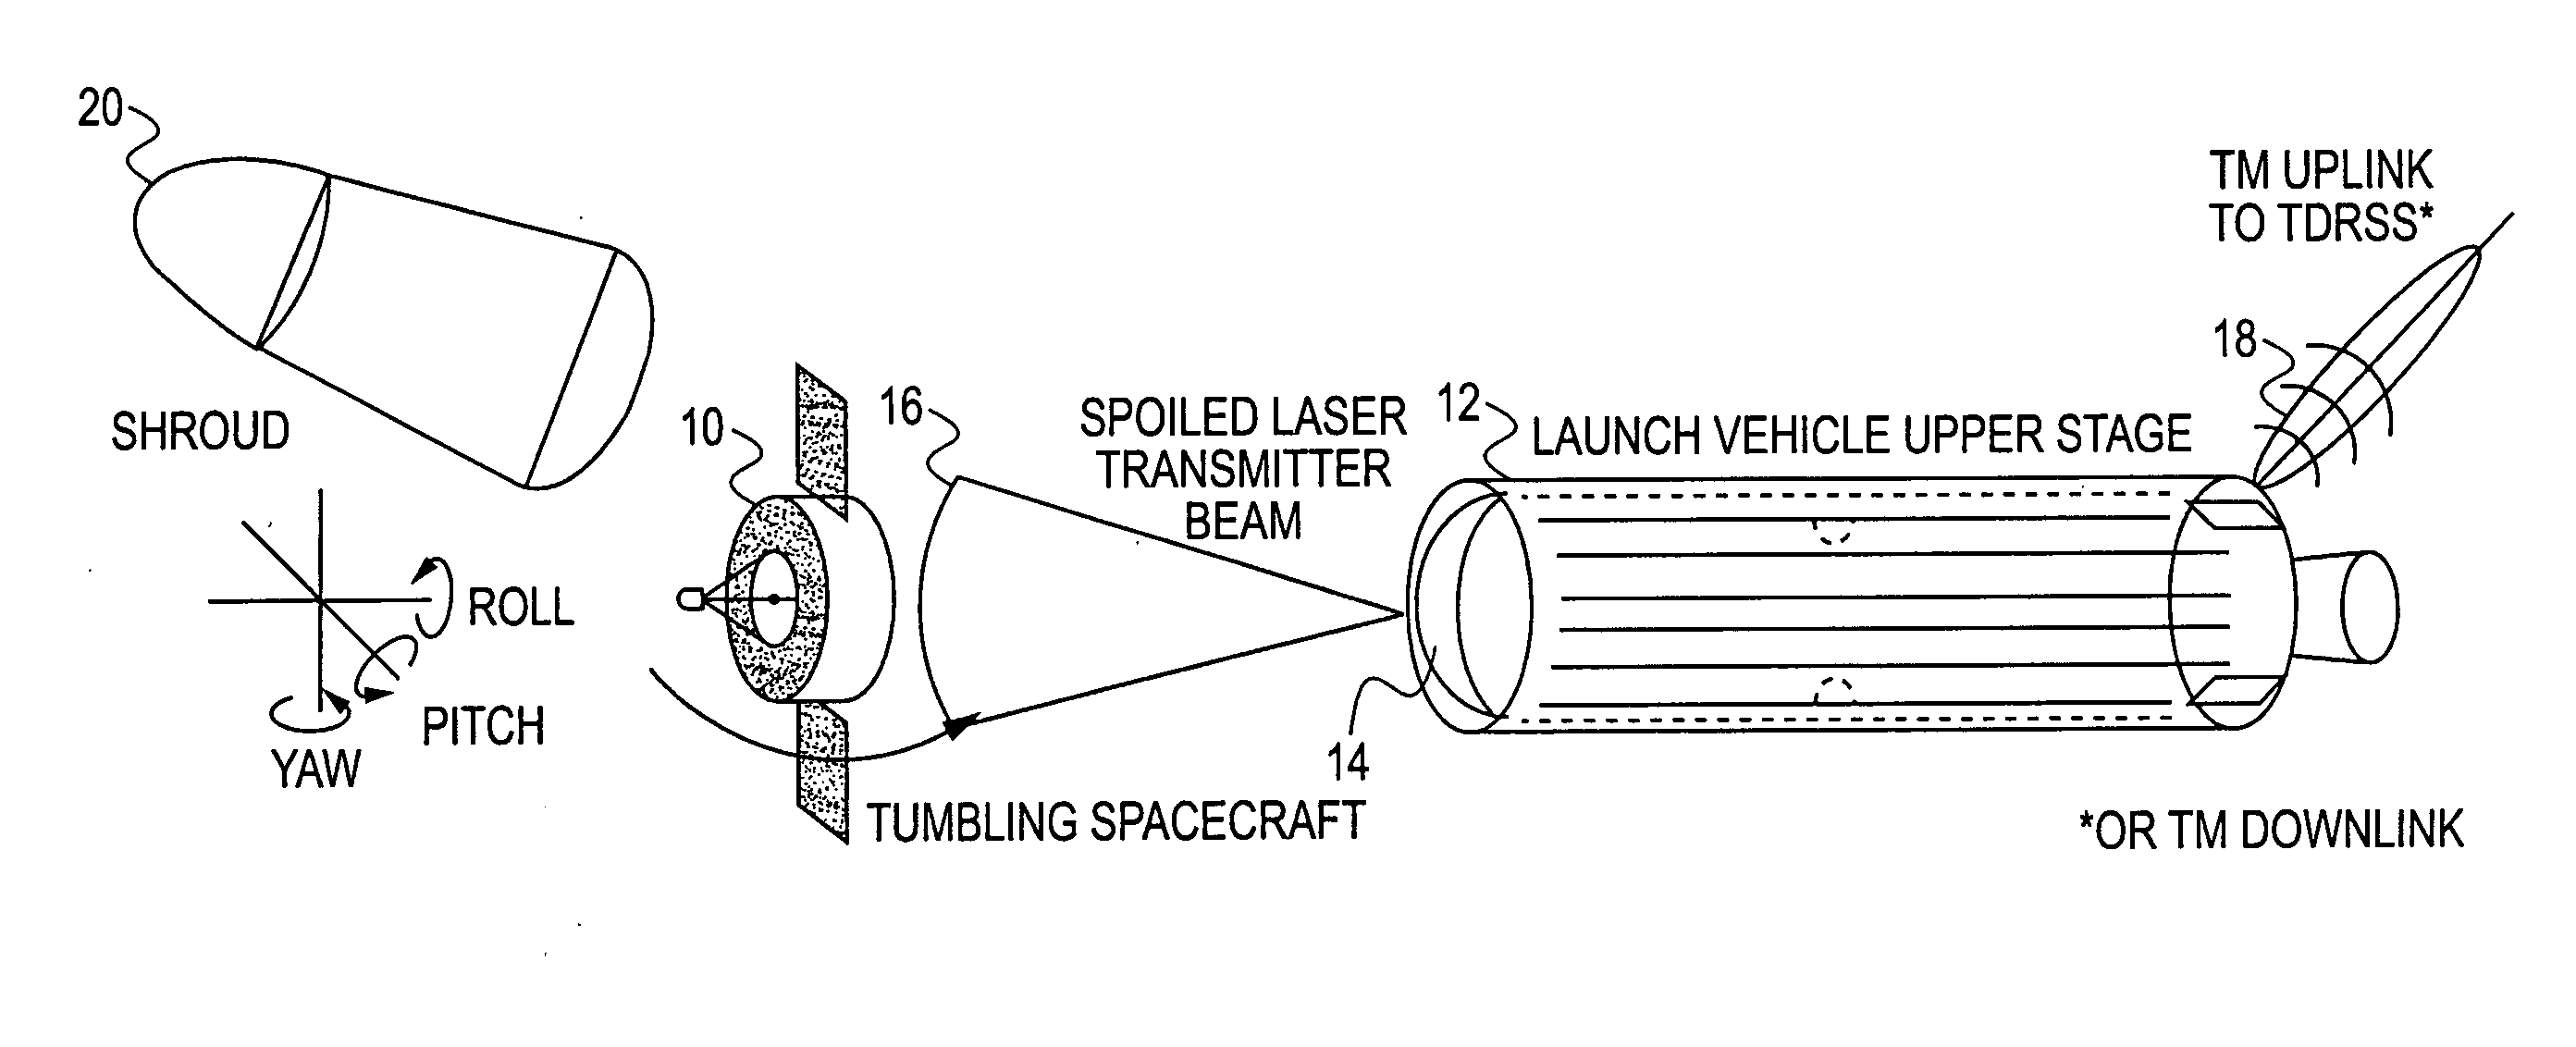 Low-power photonic telemetry system and method for spacecraft monitoring